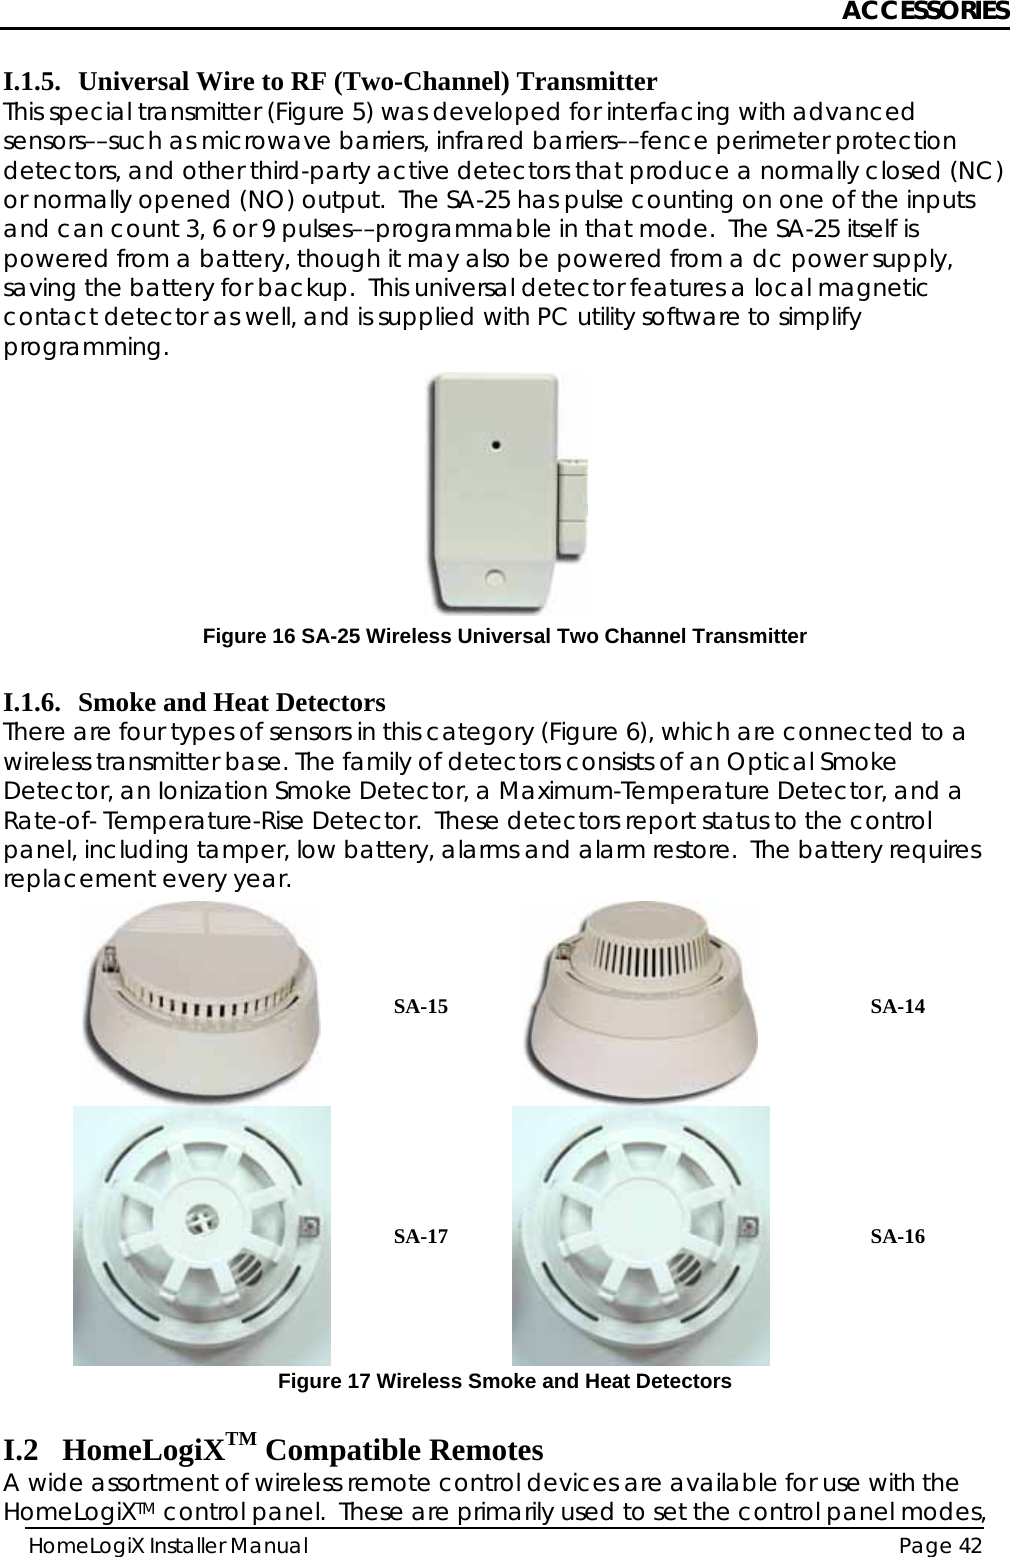 ACCESSORIES HomeLogiX Installer Manual  Page 42  I.1.5. Universal Wire to RF (Two-Channel) Transmitter This special transmitter (Figure 5) was developed for interfacing with advanced sensors––such as microwave barriers, infrared barriers––fence perimeter protection detectors, and other third-party active detectors that produce a normally closed (NC) or normally opened (NO) output.  The SA-25 has pulse counting on one of the inputs and can count 3, 6 or 9 pulses––programmable in that mode.  The SA-25 itself is powered from a battery, though it may also be powered from a dc power supply, saving the battery for backup.  This universal detector features a local magnetic contact detector as well, and is supplied with PC utility software to simplify programming.  Figure 16 SA-25 Wireless Universal Two Channel Transmitter  I.1.6. Smoke and Heat Detectors There are four types of sensors in this category (Figure 6), which are connected to a wireless transmitter base. The family of detectors consists of an Optical Smoke Detector, an Ionization Smoke Detector, a Maximum-Temperature Detector, and a Rate-of- Temperature-Rise Detector.  These detectors report status to the control panel, including tamper, low battery, alarms and alarm restore.  The battery requires replacement every year.   SA-15  SA-14  SA-17  SA-16 Figure 17 Wireless Smoke and Heat Detectors  I.2 HomeLogiXTM Compatible Remotes A wide assortment of wireless remote control devices are available for use with the HomeLogiXTM control panel.  These are primarily used to set the control panel modes, 